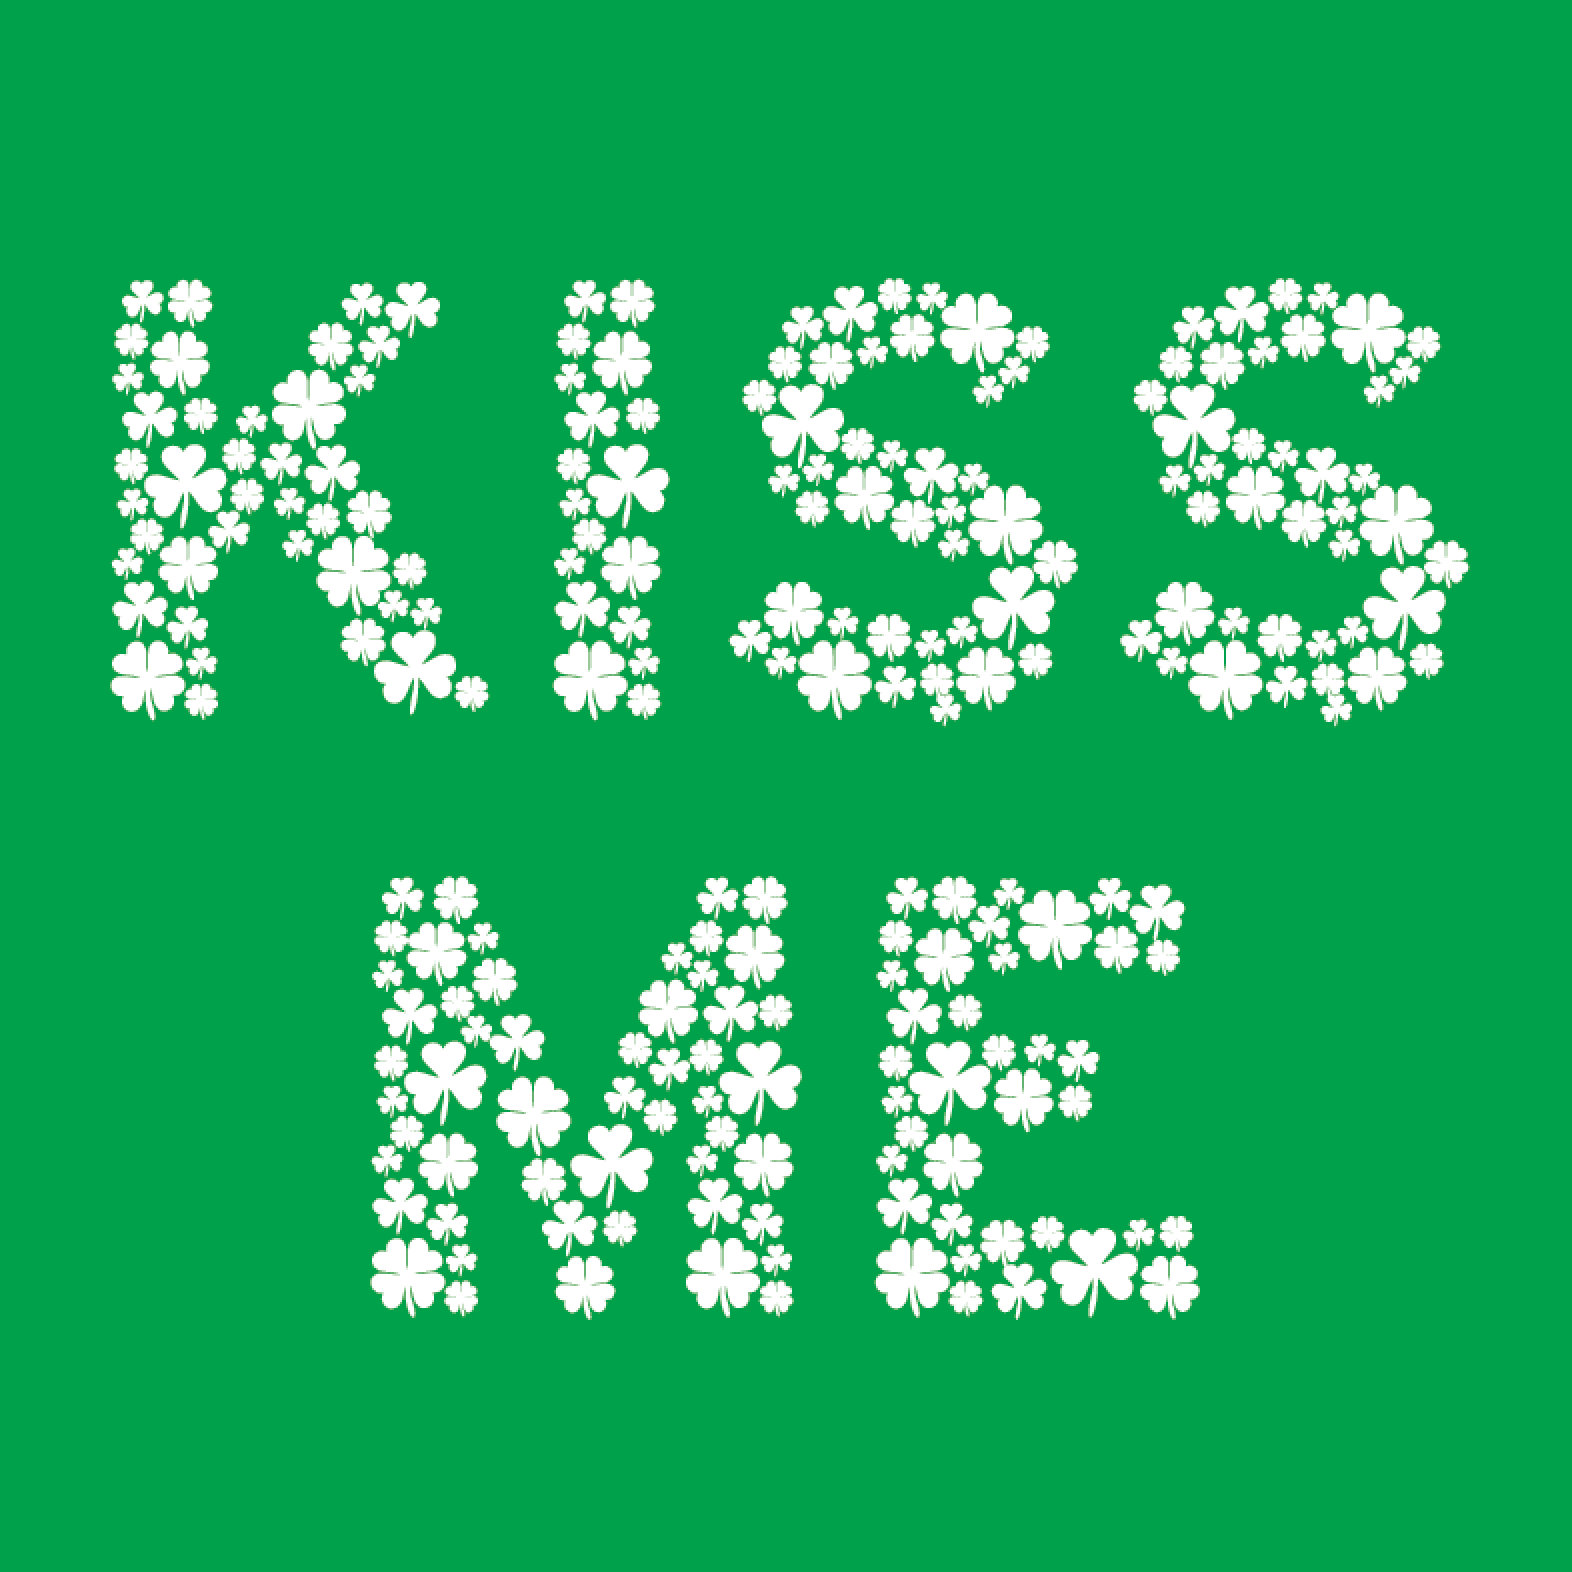 Cute St. Patrick's Day t-shirt: Kiss Me (I’m Irish) T-Shirts, Hats and Beer Cozy Spelled With Shamrock Clovers for St. Patrick's Day